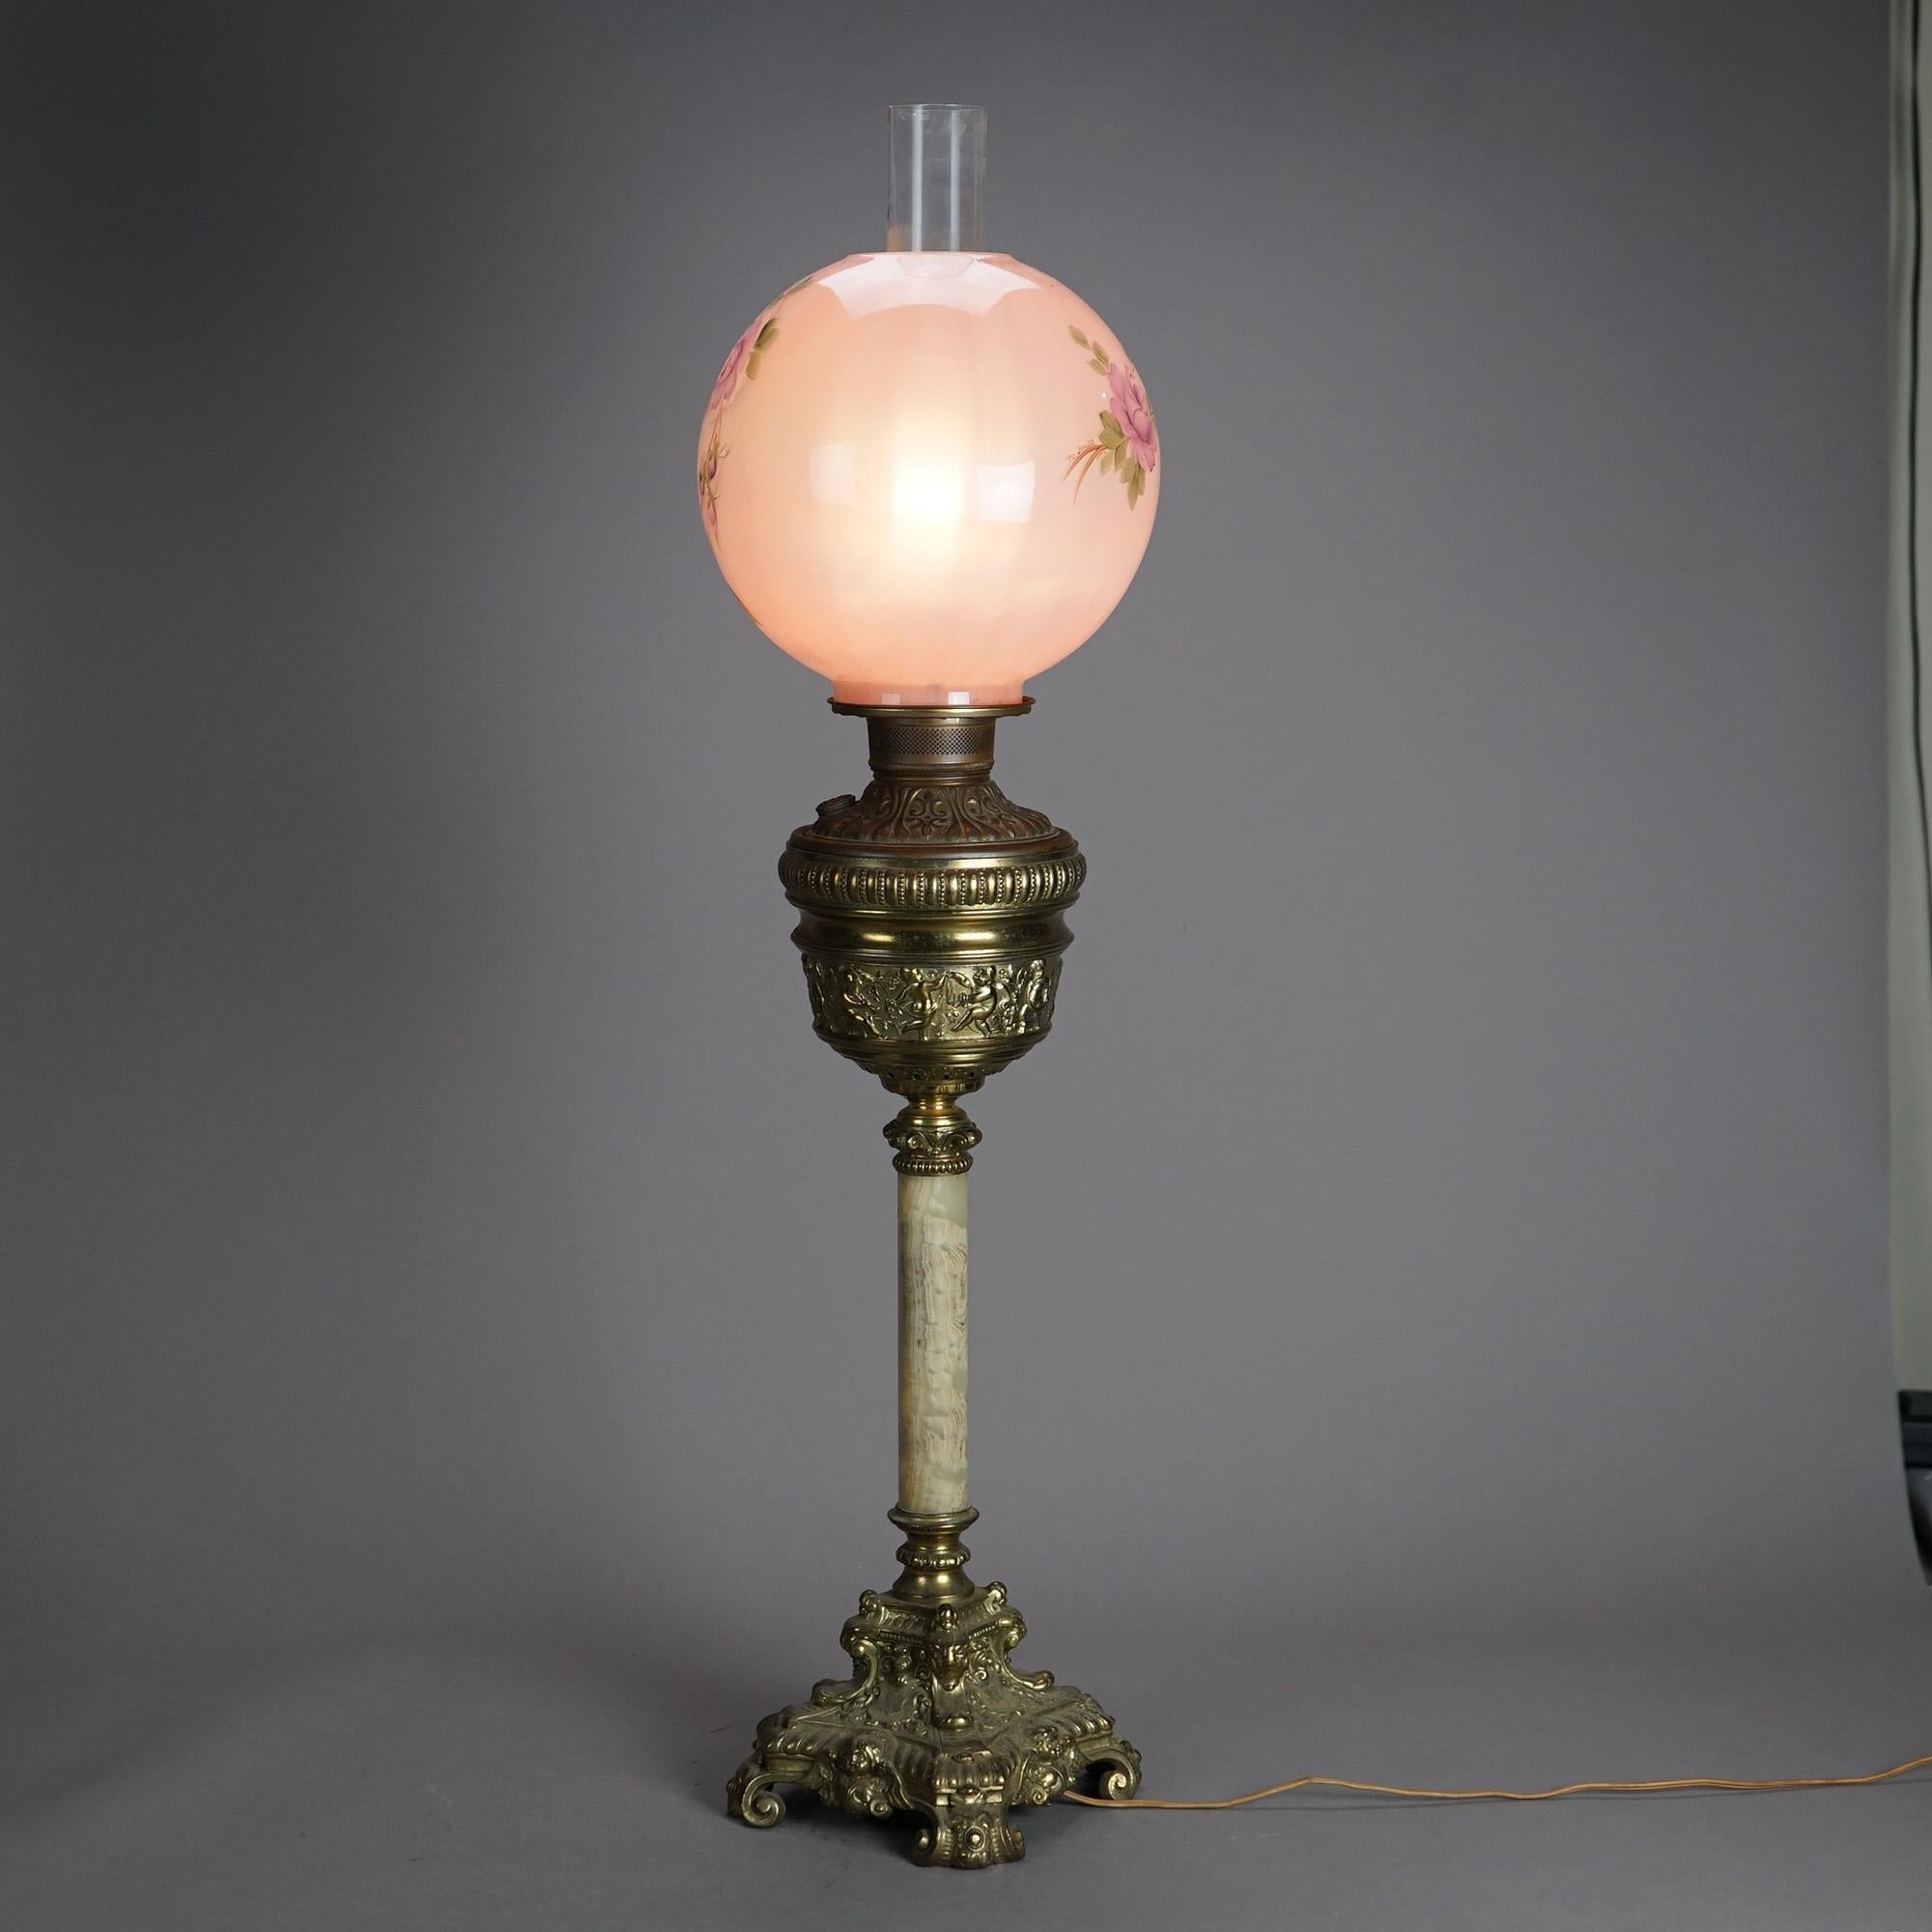 Hand-Painted Antique Victorian Gilt Metal & Onyx Gone With The Wind Parlor Lamp c1880